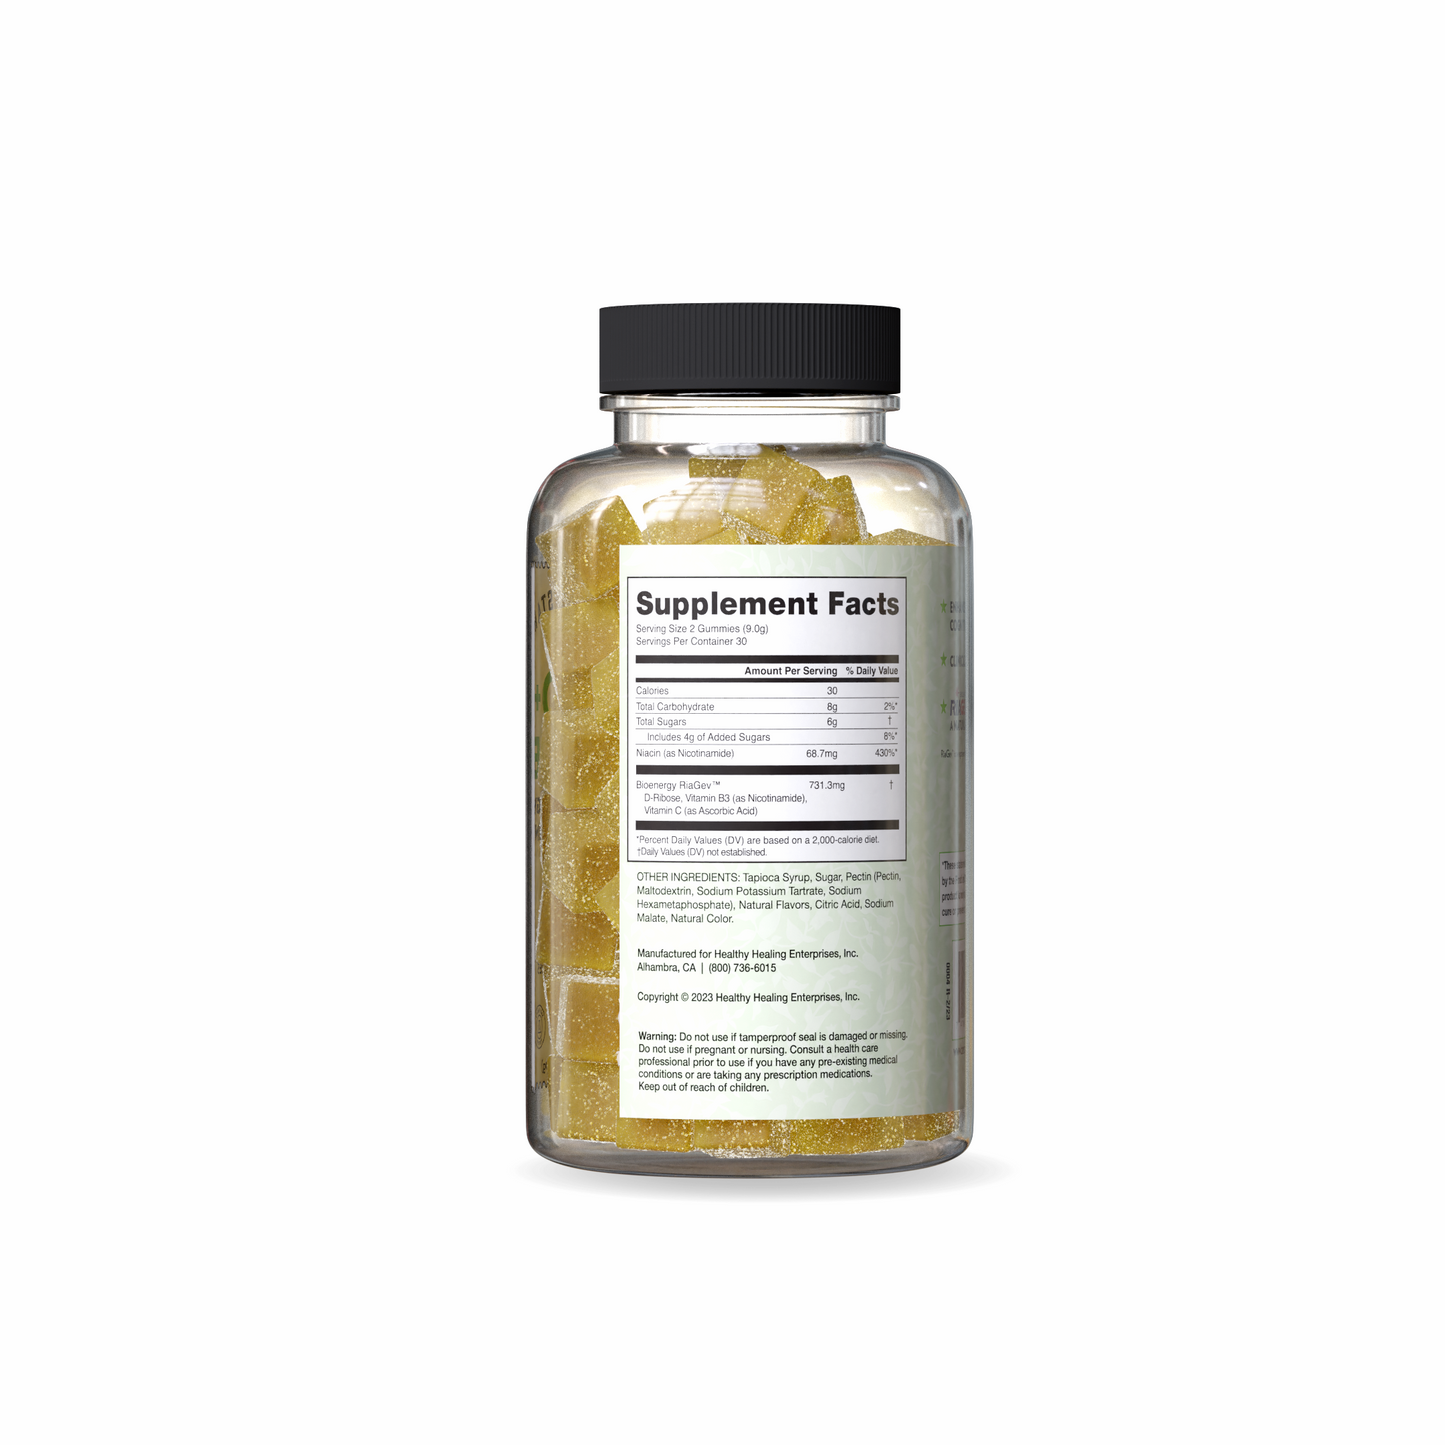 Crystal Star NAD+ Gummies for cellular energy and aging, Ingredients